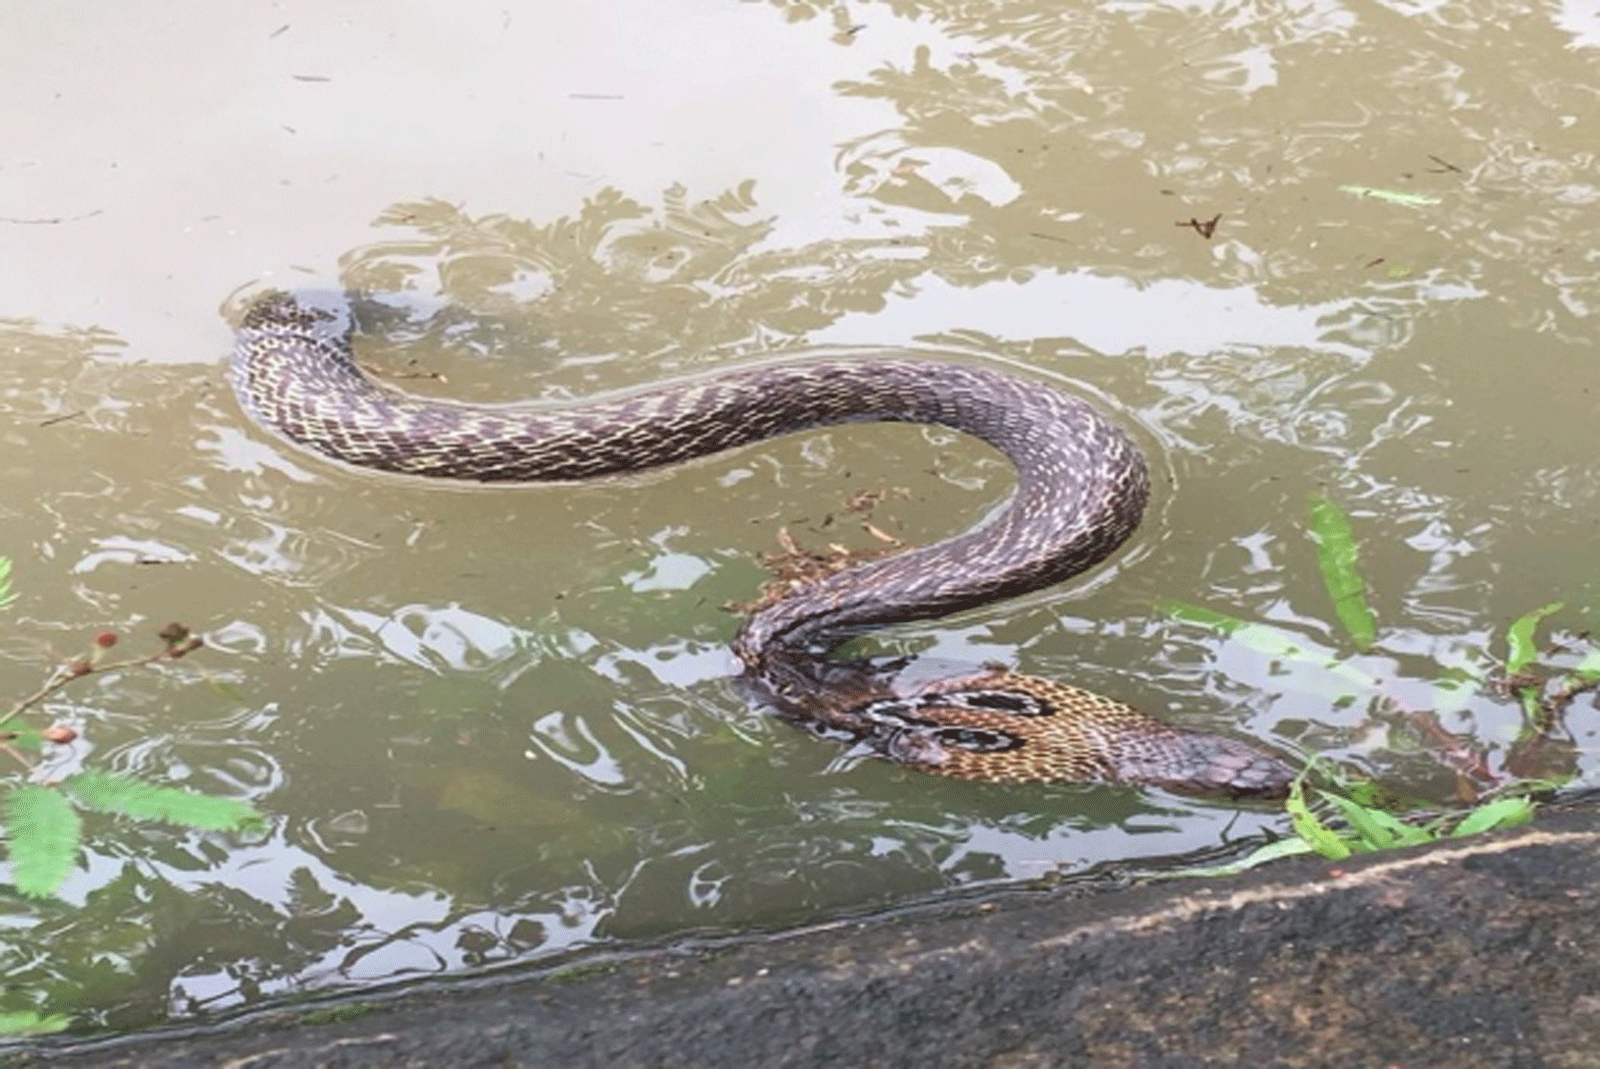 Sister Brother death by snake bites In Faizabad